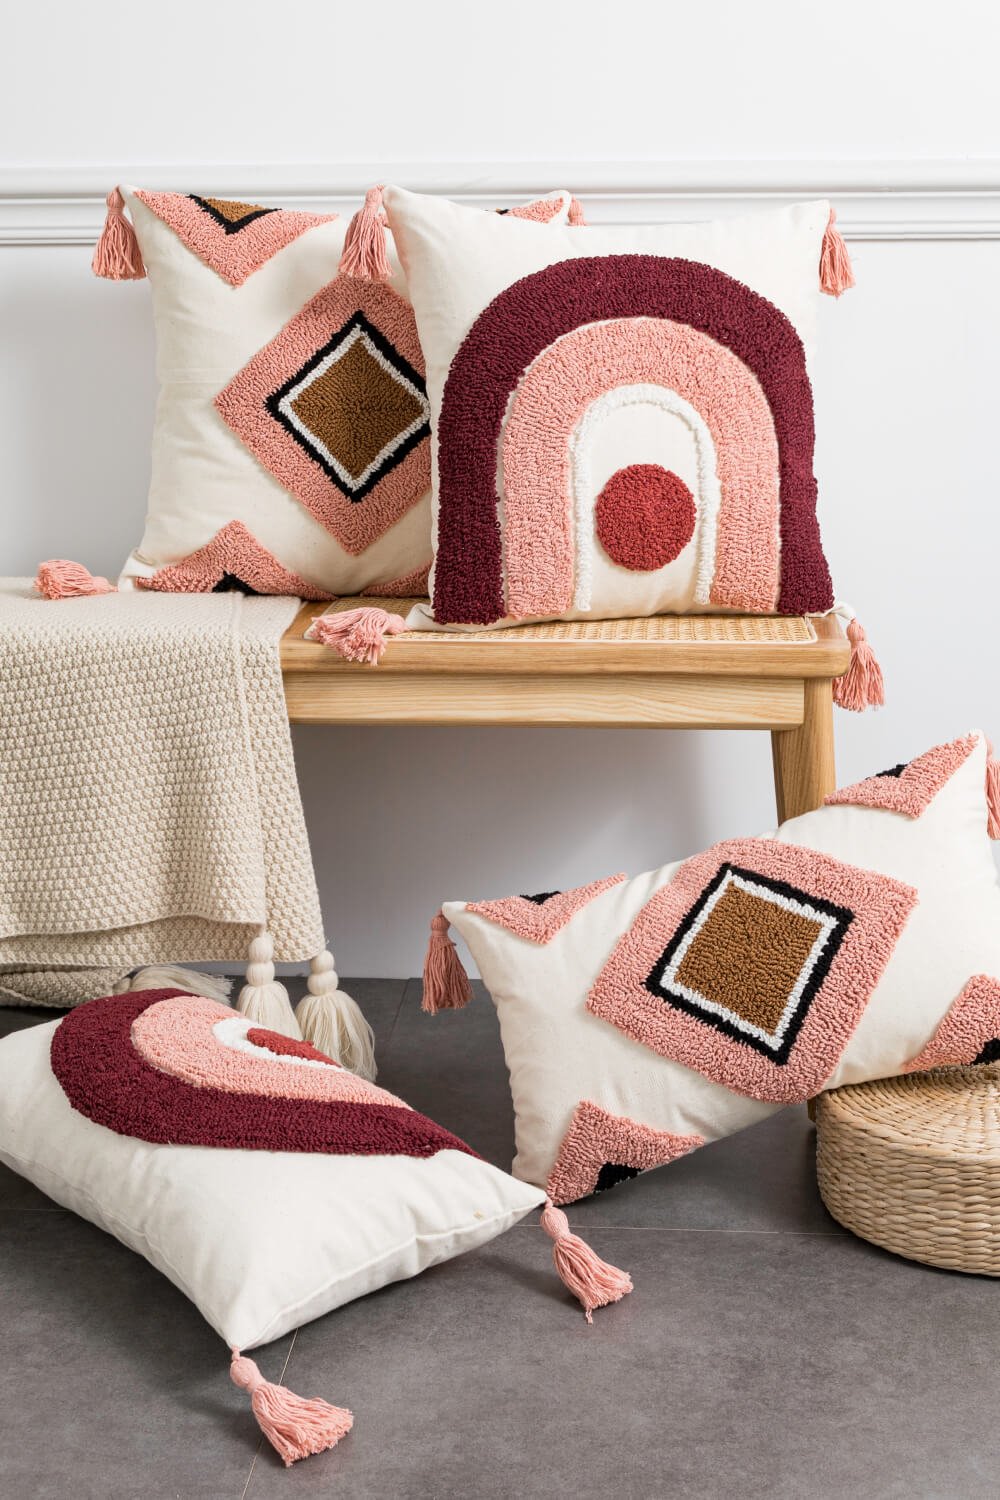 4 Styles Geometric Graphic Tassel Pillow Cover - Fashion Girl Online Store